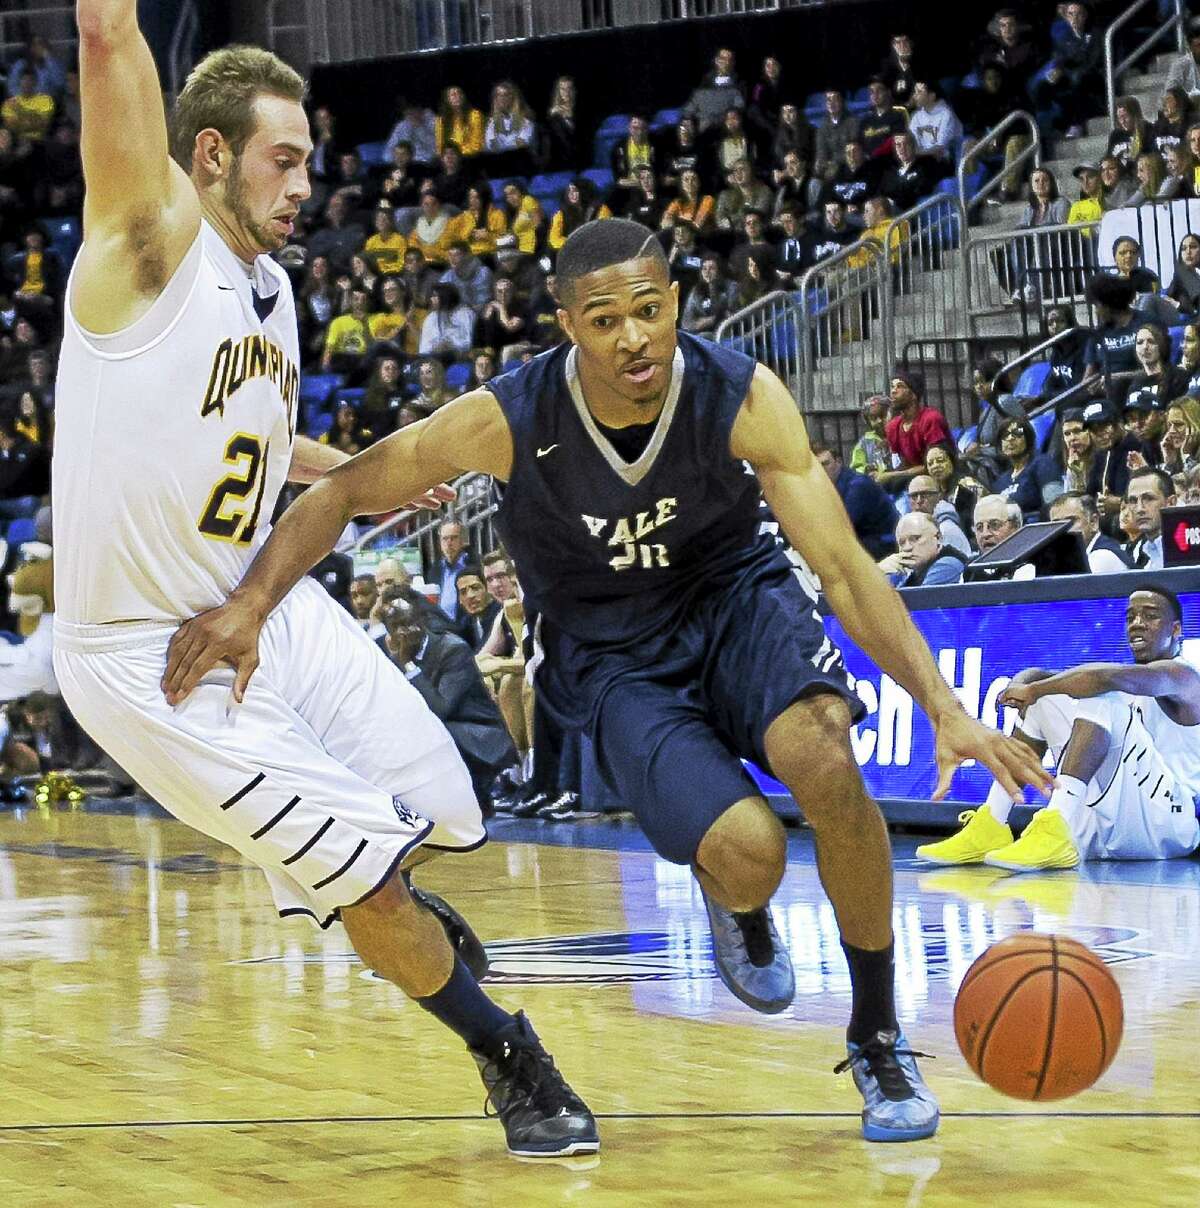 Yale senior guard Javier Duren and the Bulldogs will take on UConn Friday night in Storrs.